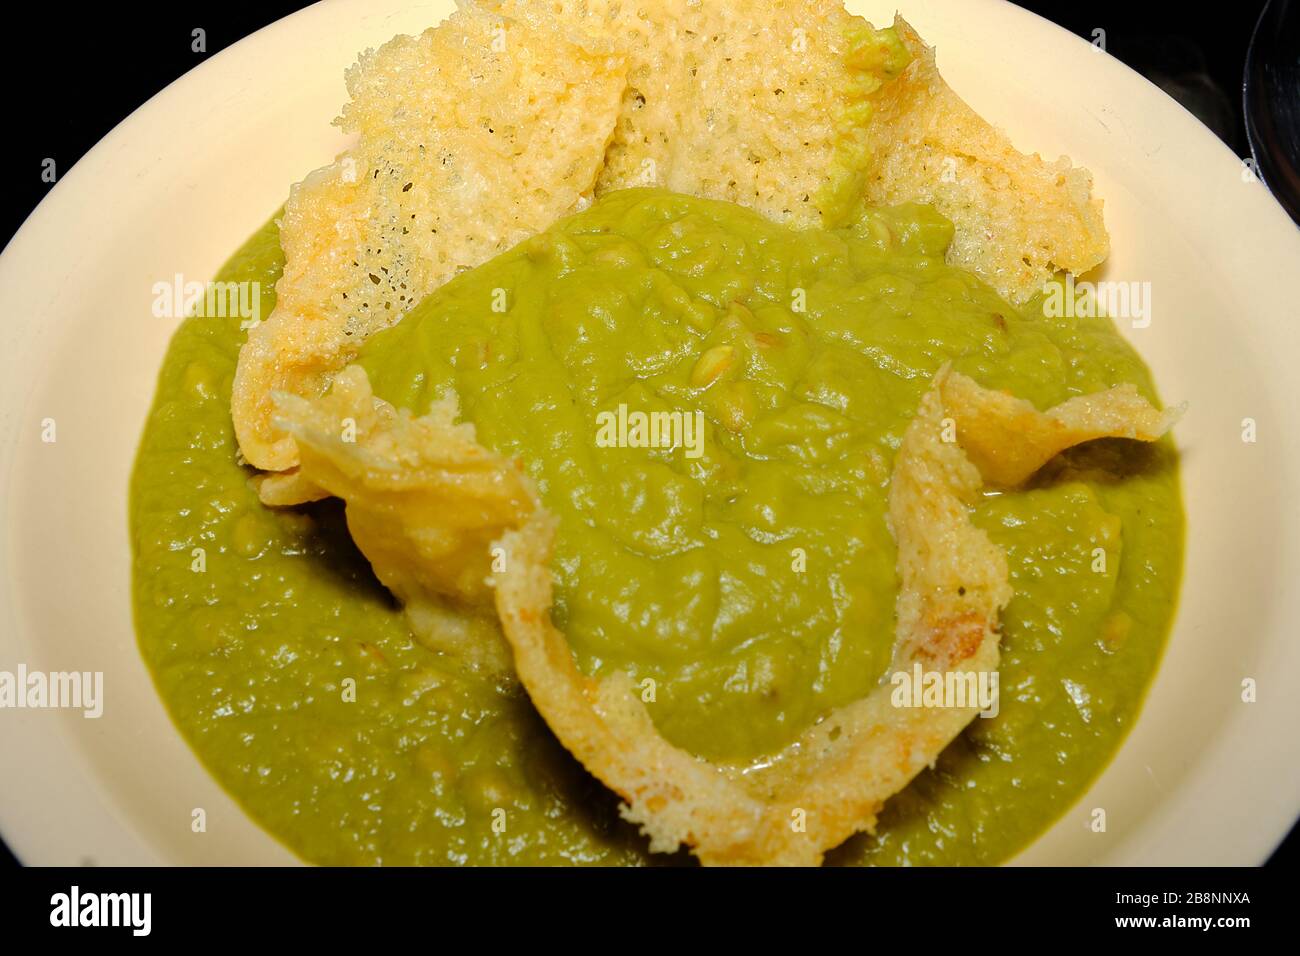 Italian grourmet plat with parmesan cheese and a velvety of peas Stock Photo